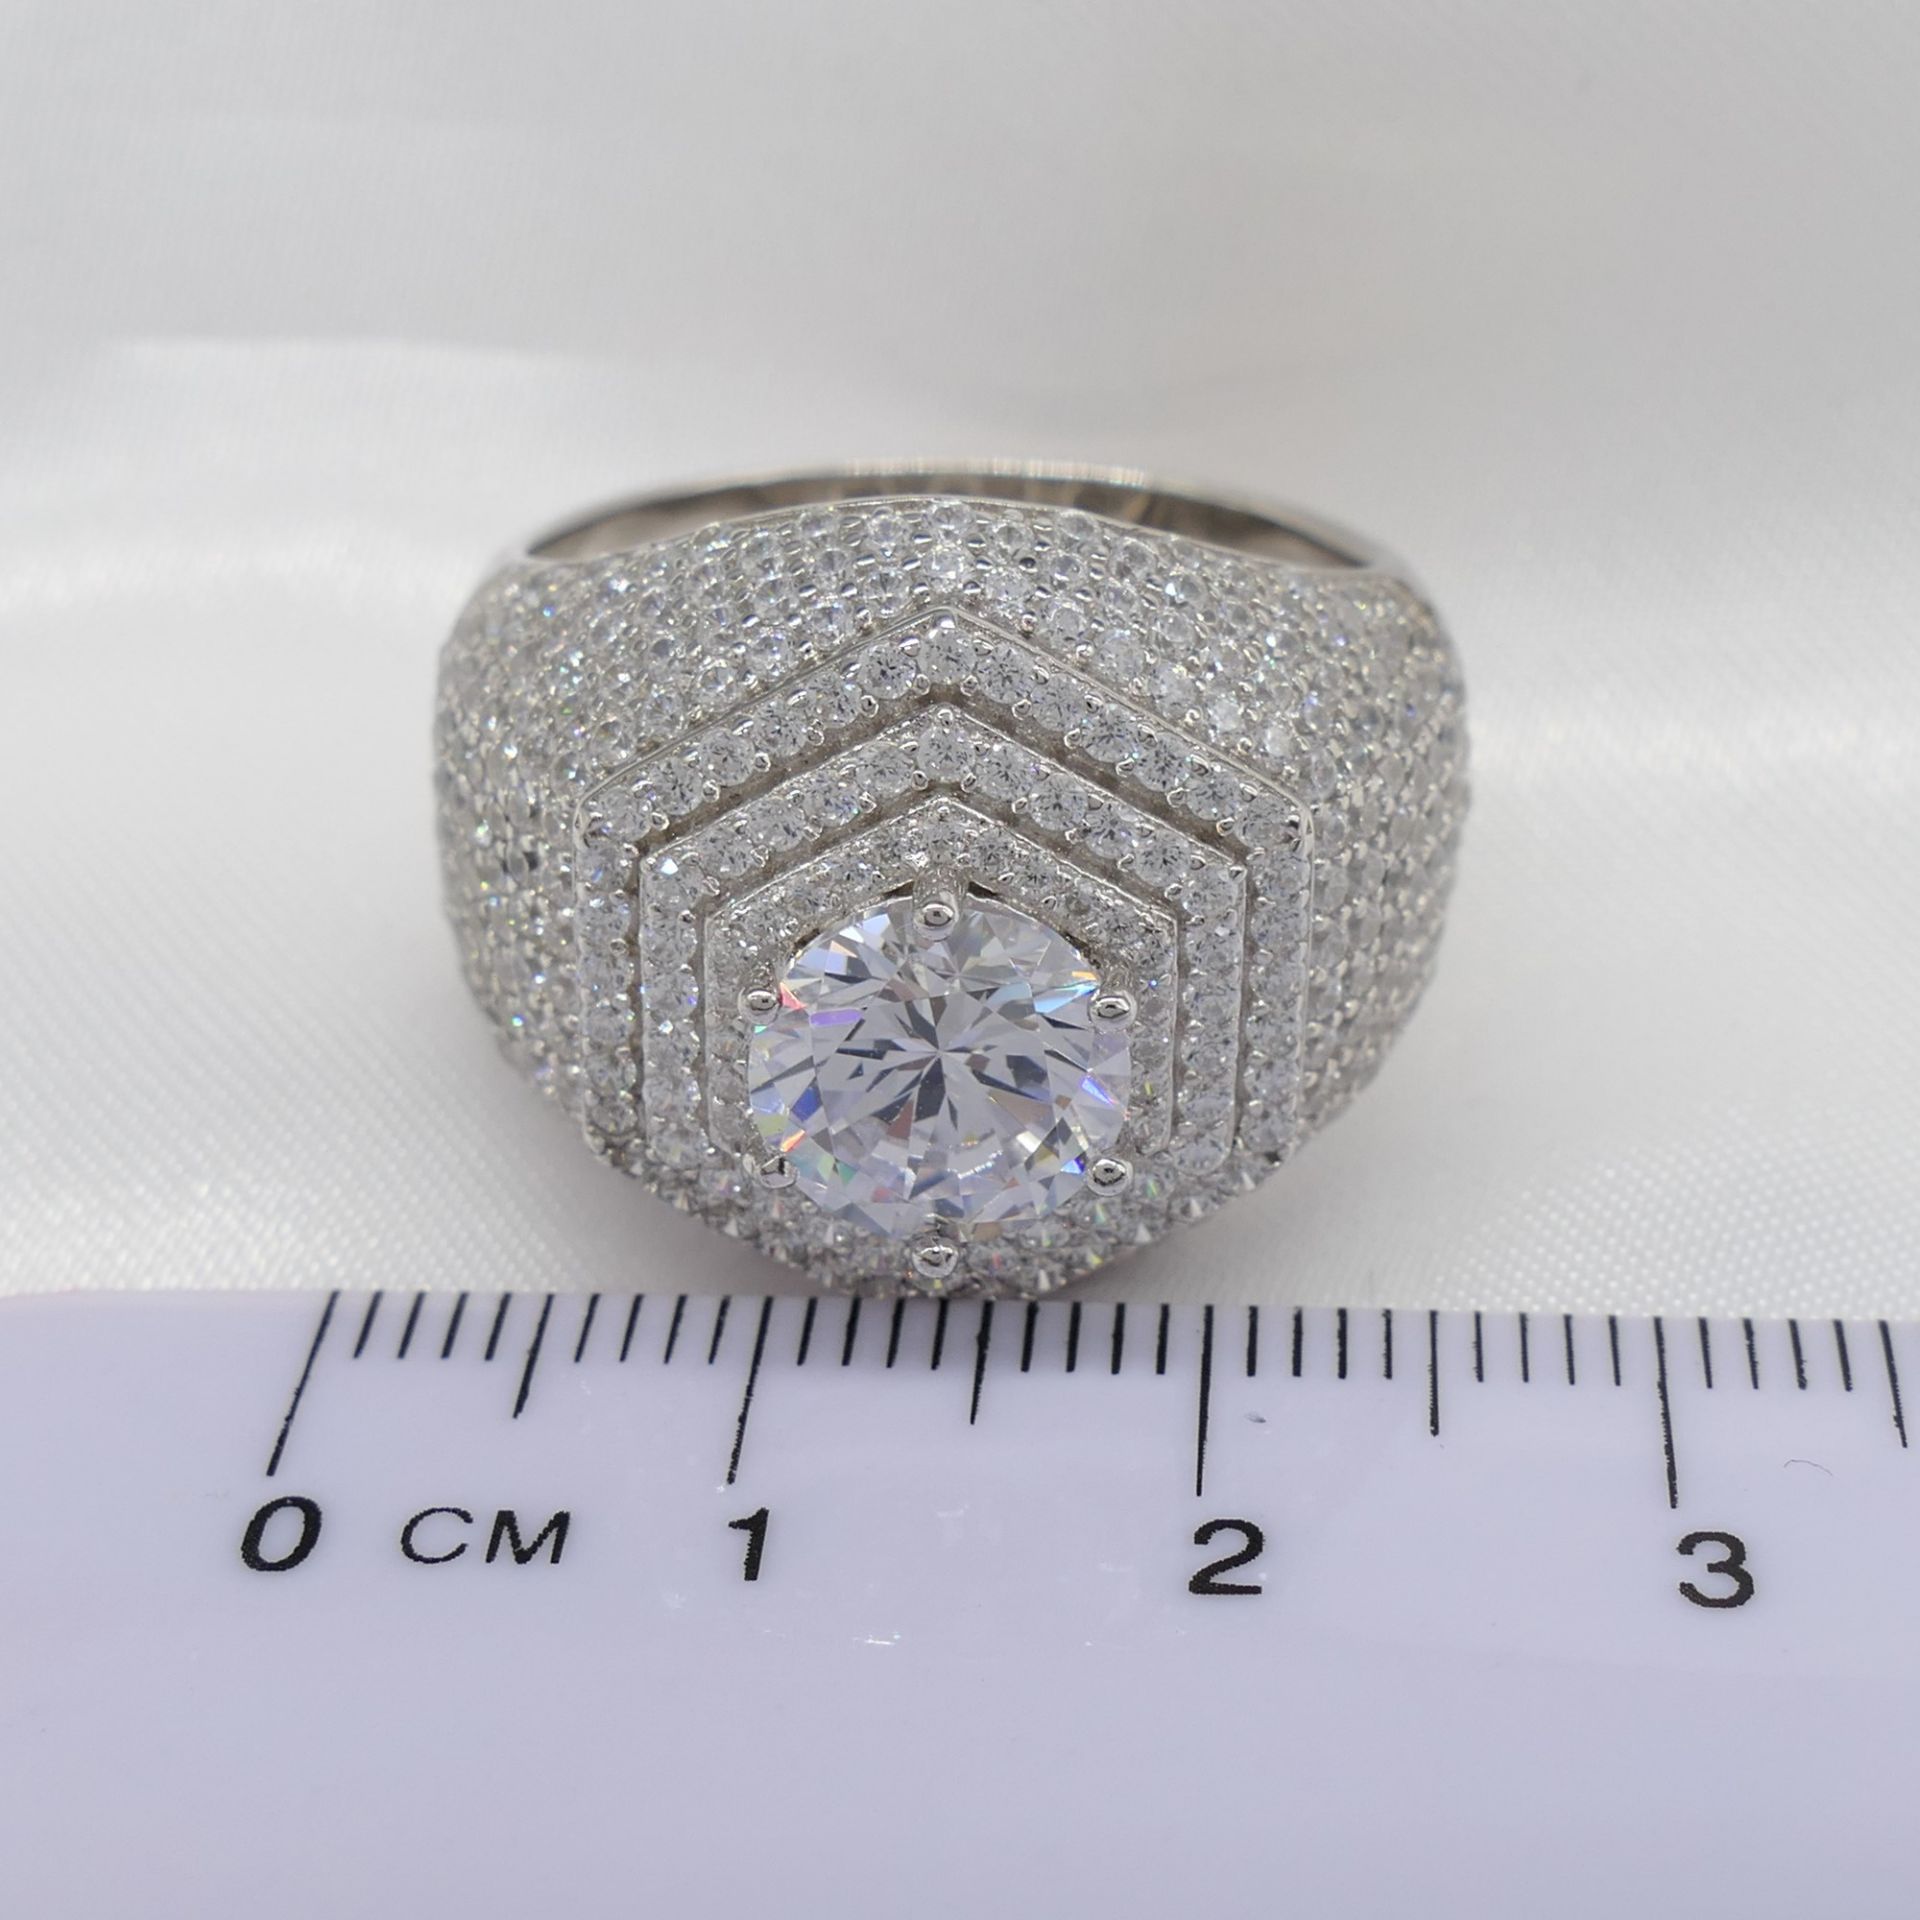 Large ""Hexagon"" Silver Dinner Ring Heavily-Set With White Gems - Image 3 of 6